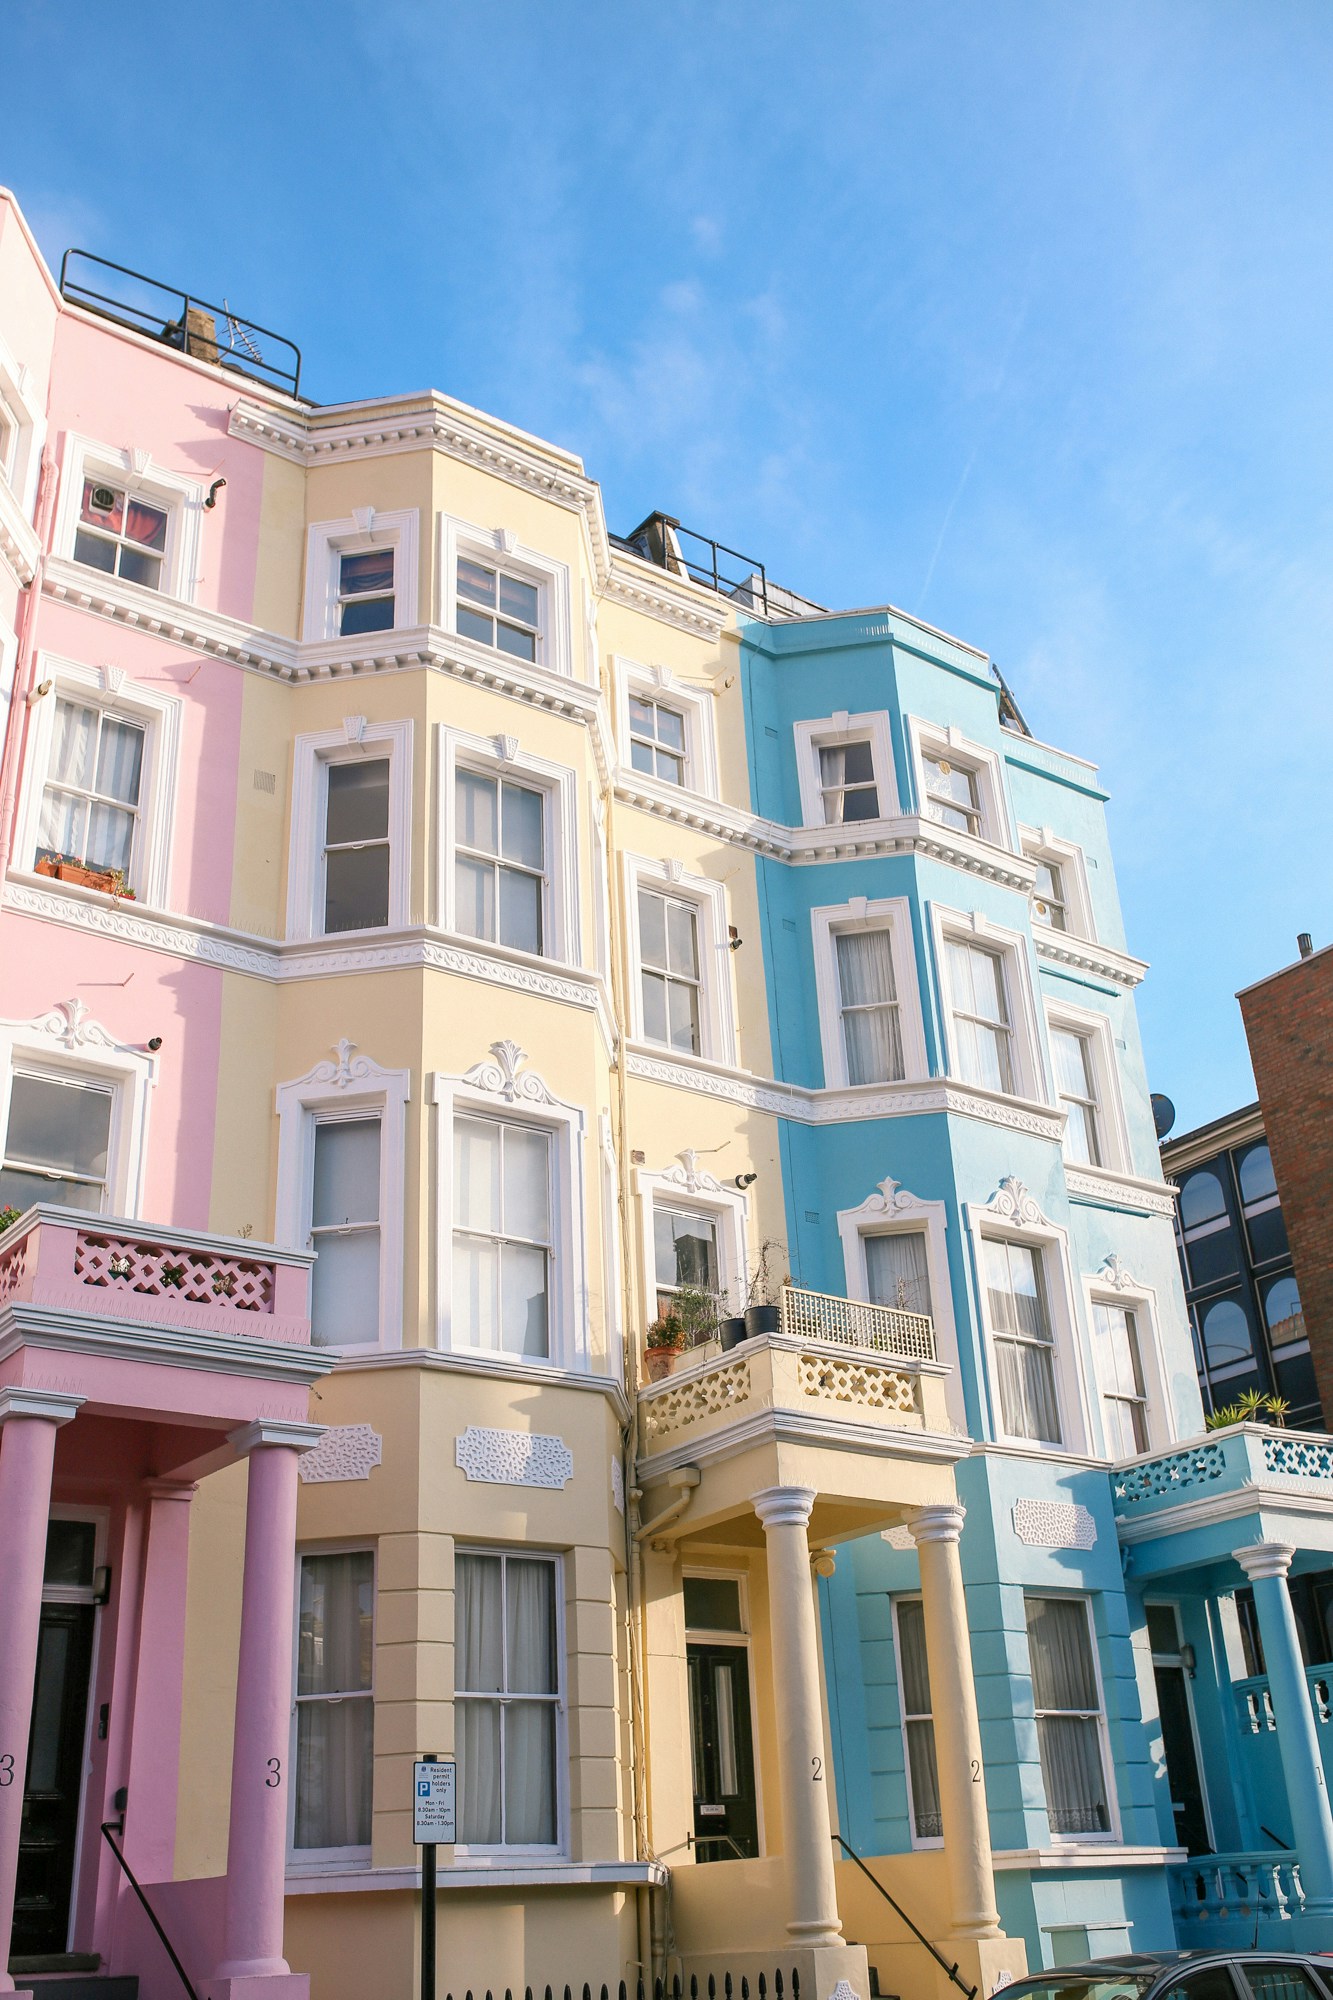 Colville Houses in Notting Hill London - the cutest colourful houses in the city!